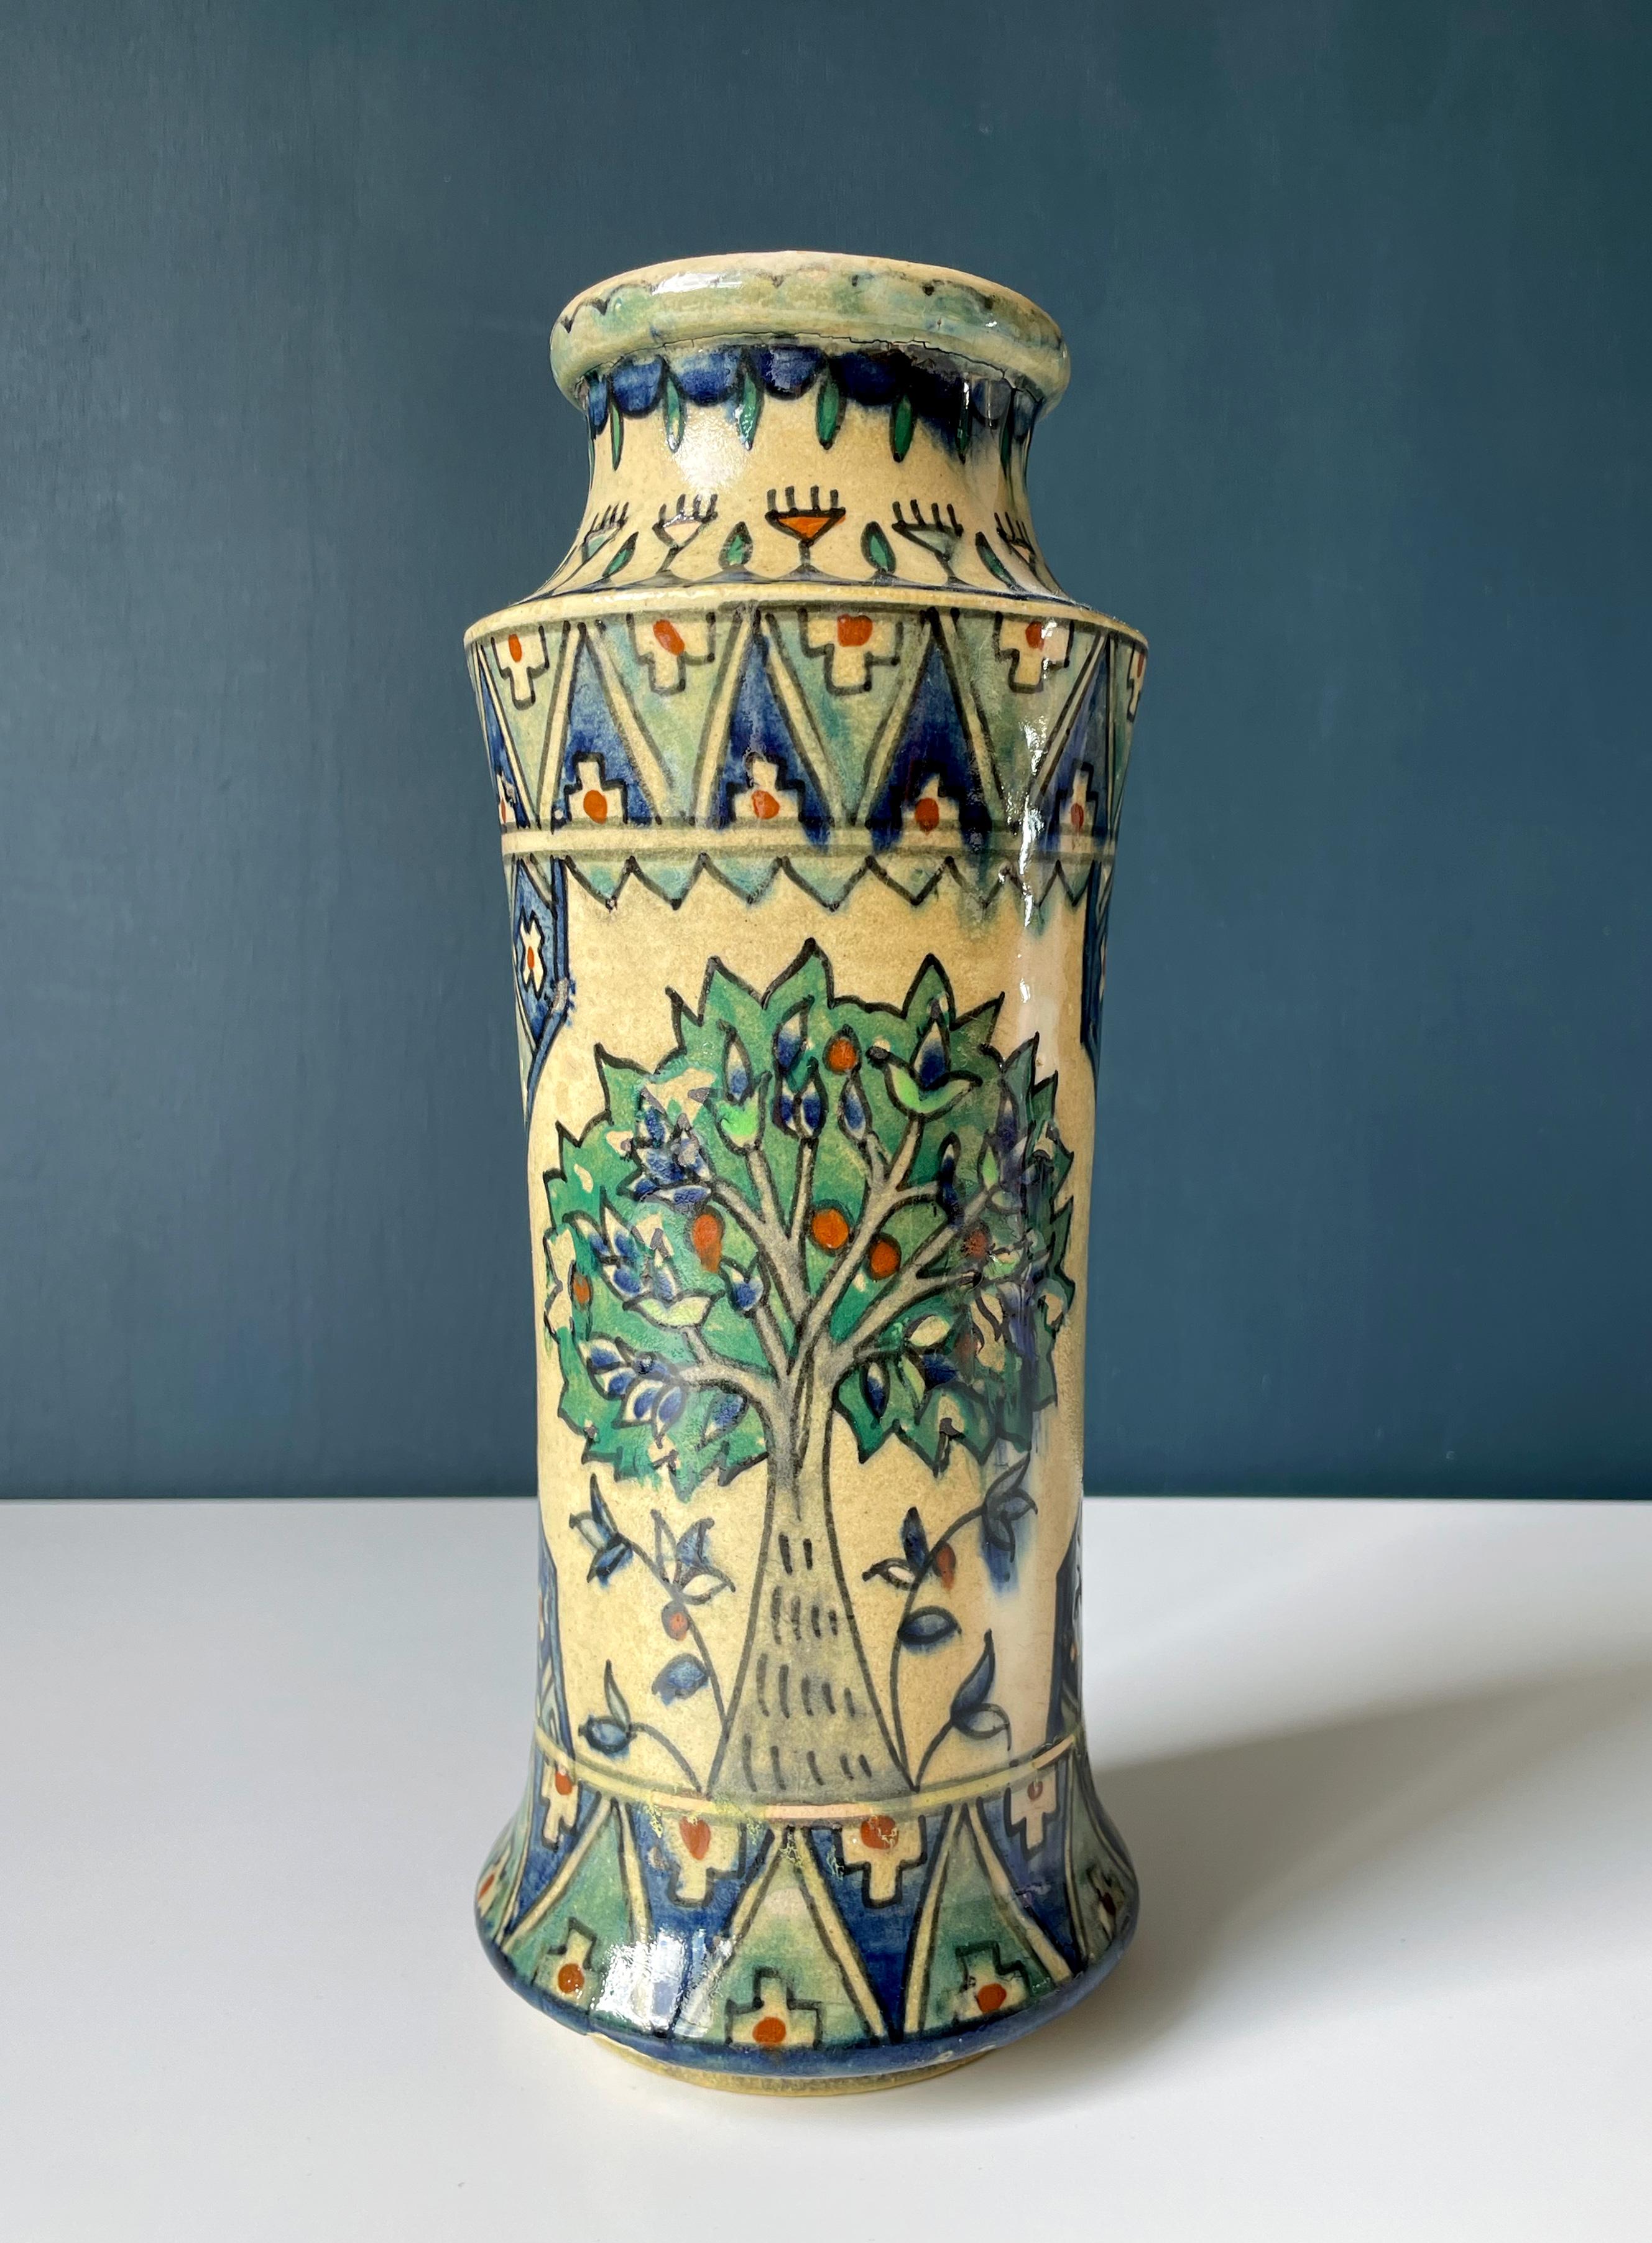 Rare tall and slender early 20th century cylinder shaped Armenian ceramic vase with floral, organic and graphic decorations handpainted in green, blue, red, gray colors on sand colored pottery base under clear glaze. Manufactured by Armenian pottery